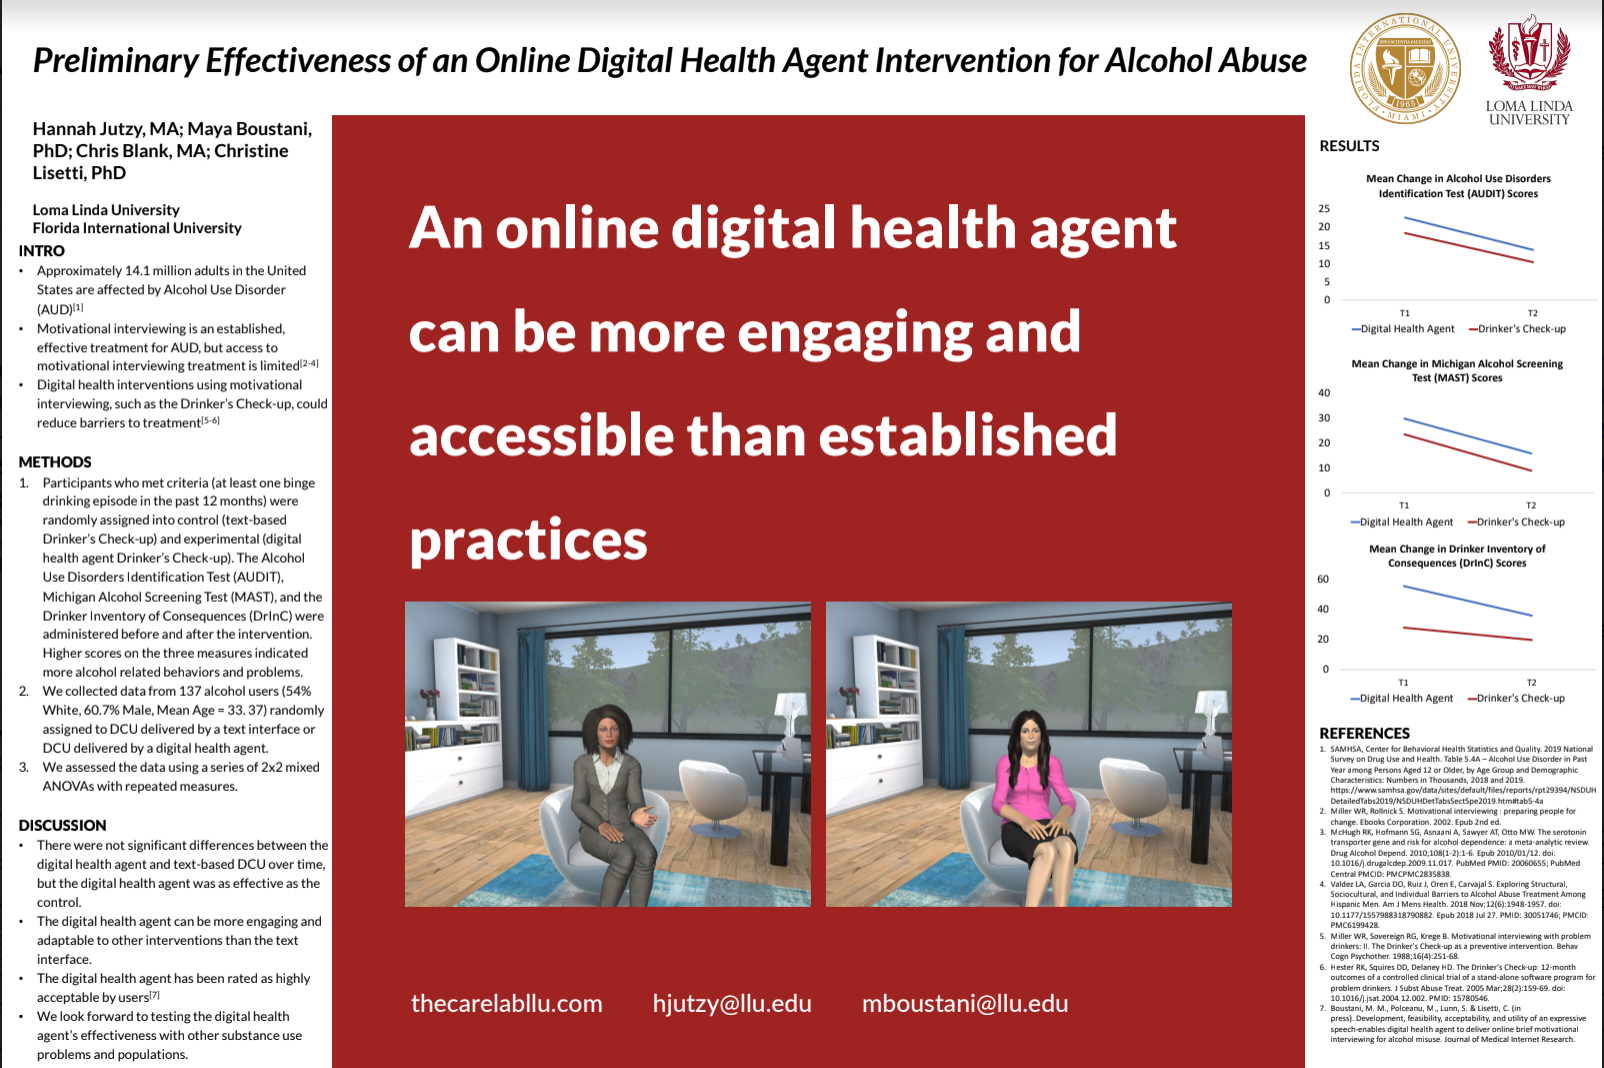 Preliminary Effectiveness of an Online Digital Health Agent Intervention for Alcohol Abuse